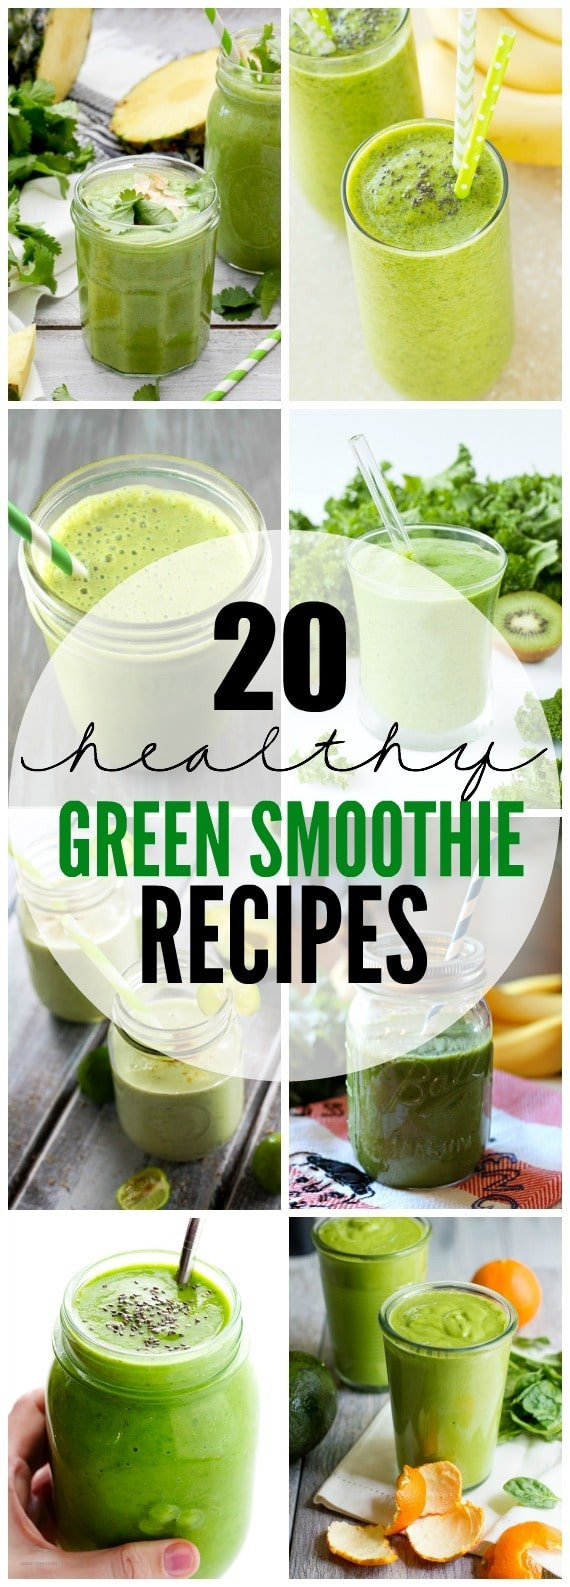 Easy Healthy Smoothies
 20 Healthy Green Smoothie Recipes Yummy Healthy Easy